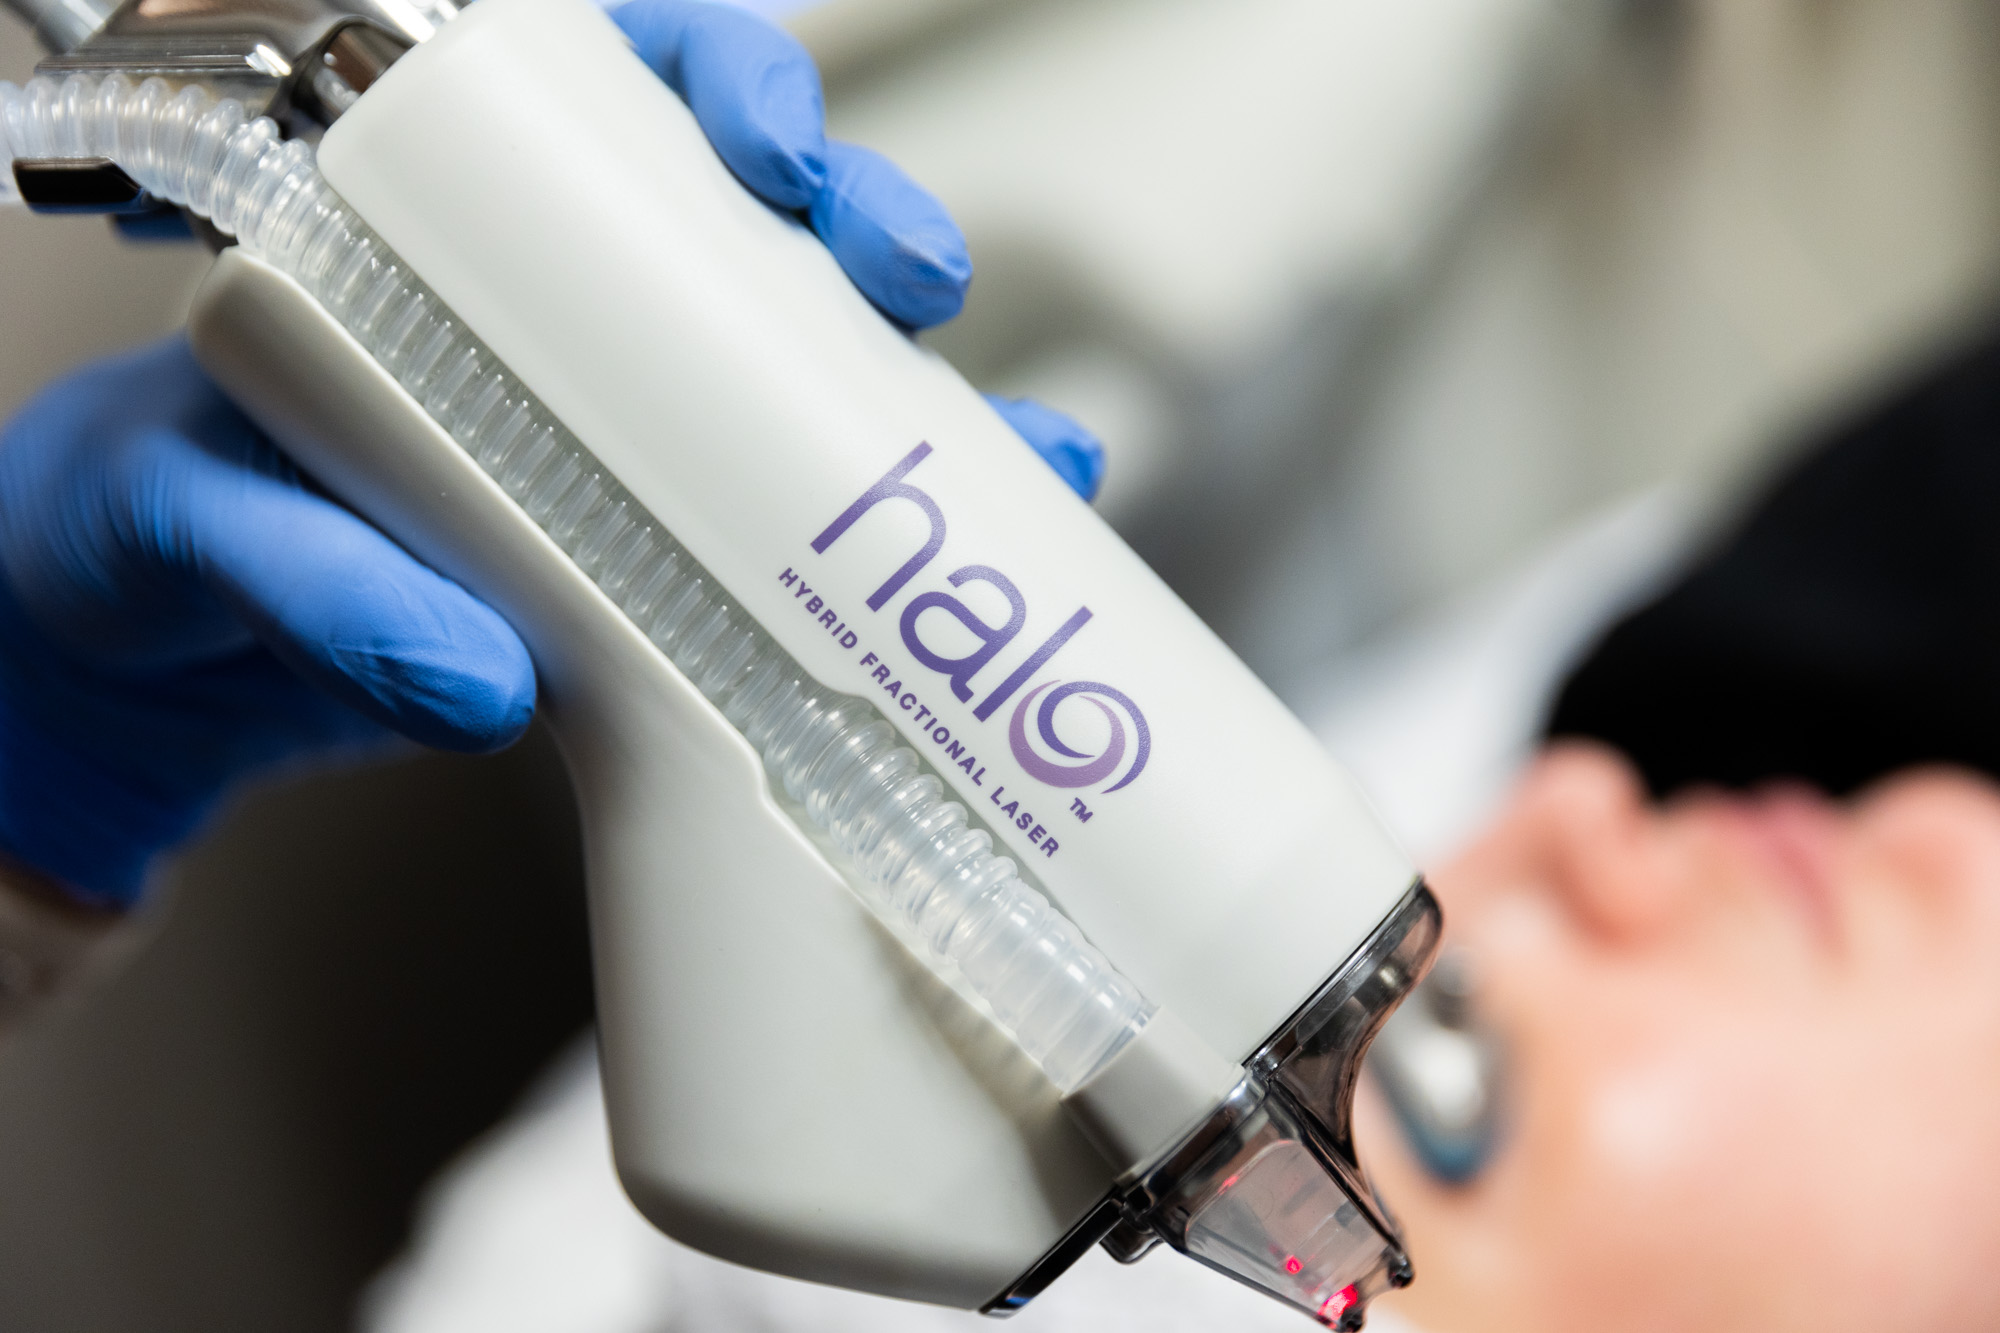 Close up image of the HALO handheld application tool. A medical provider can easily hold it in one hand. There is a tube that runs along the side of the applicator.